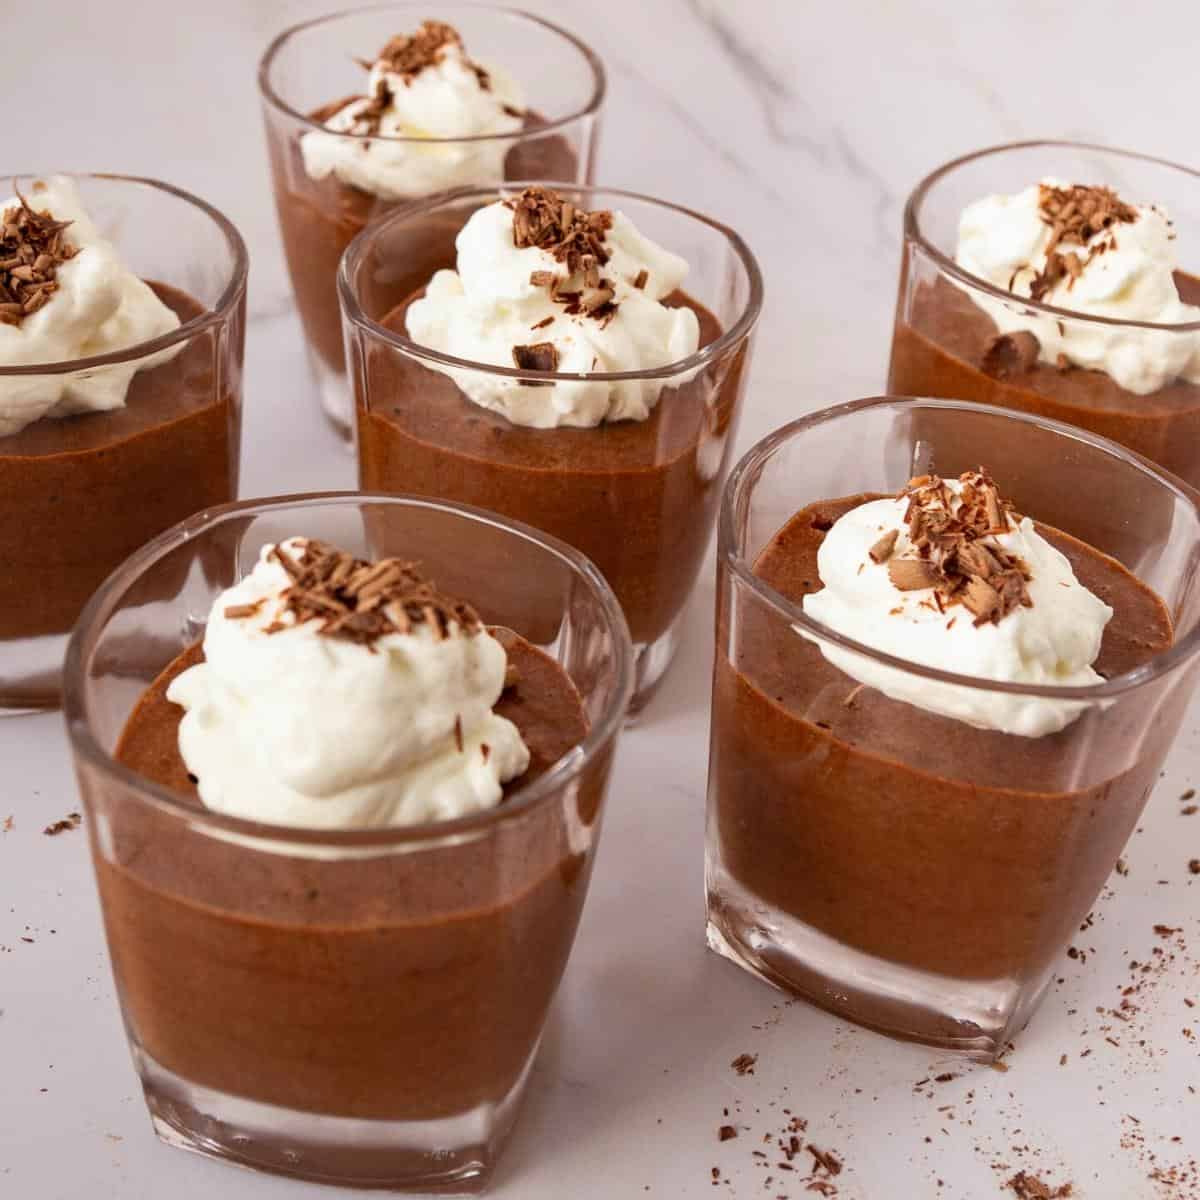 Glasses with mousse made with chocolate.